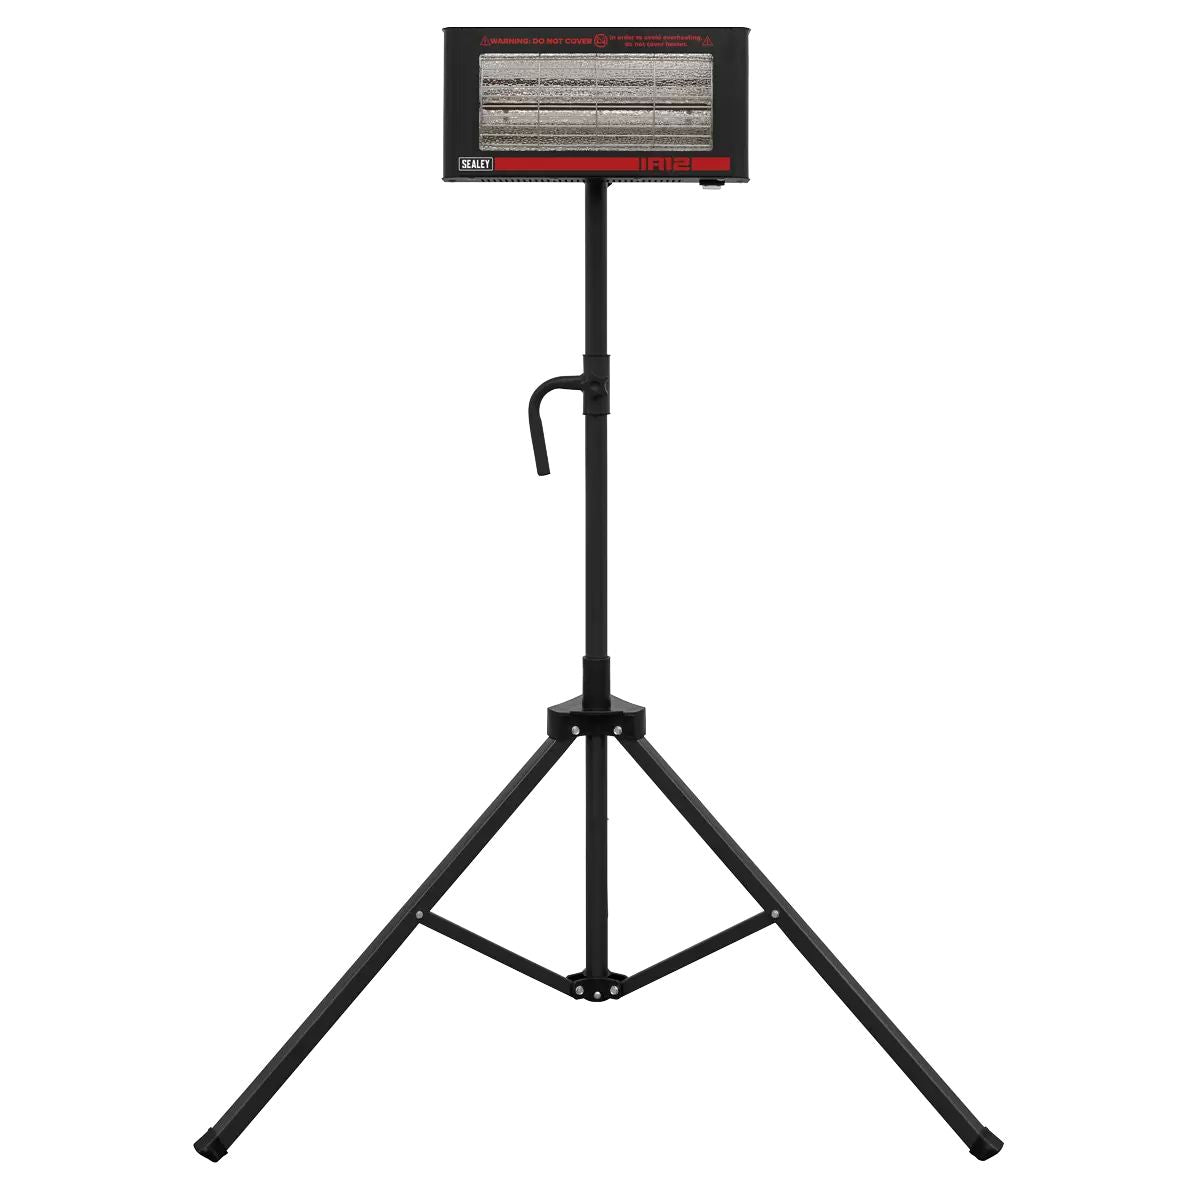 Sealey IR12CT 1.2kW Infrared Quartz Heater with Tripod Stand 230V